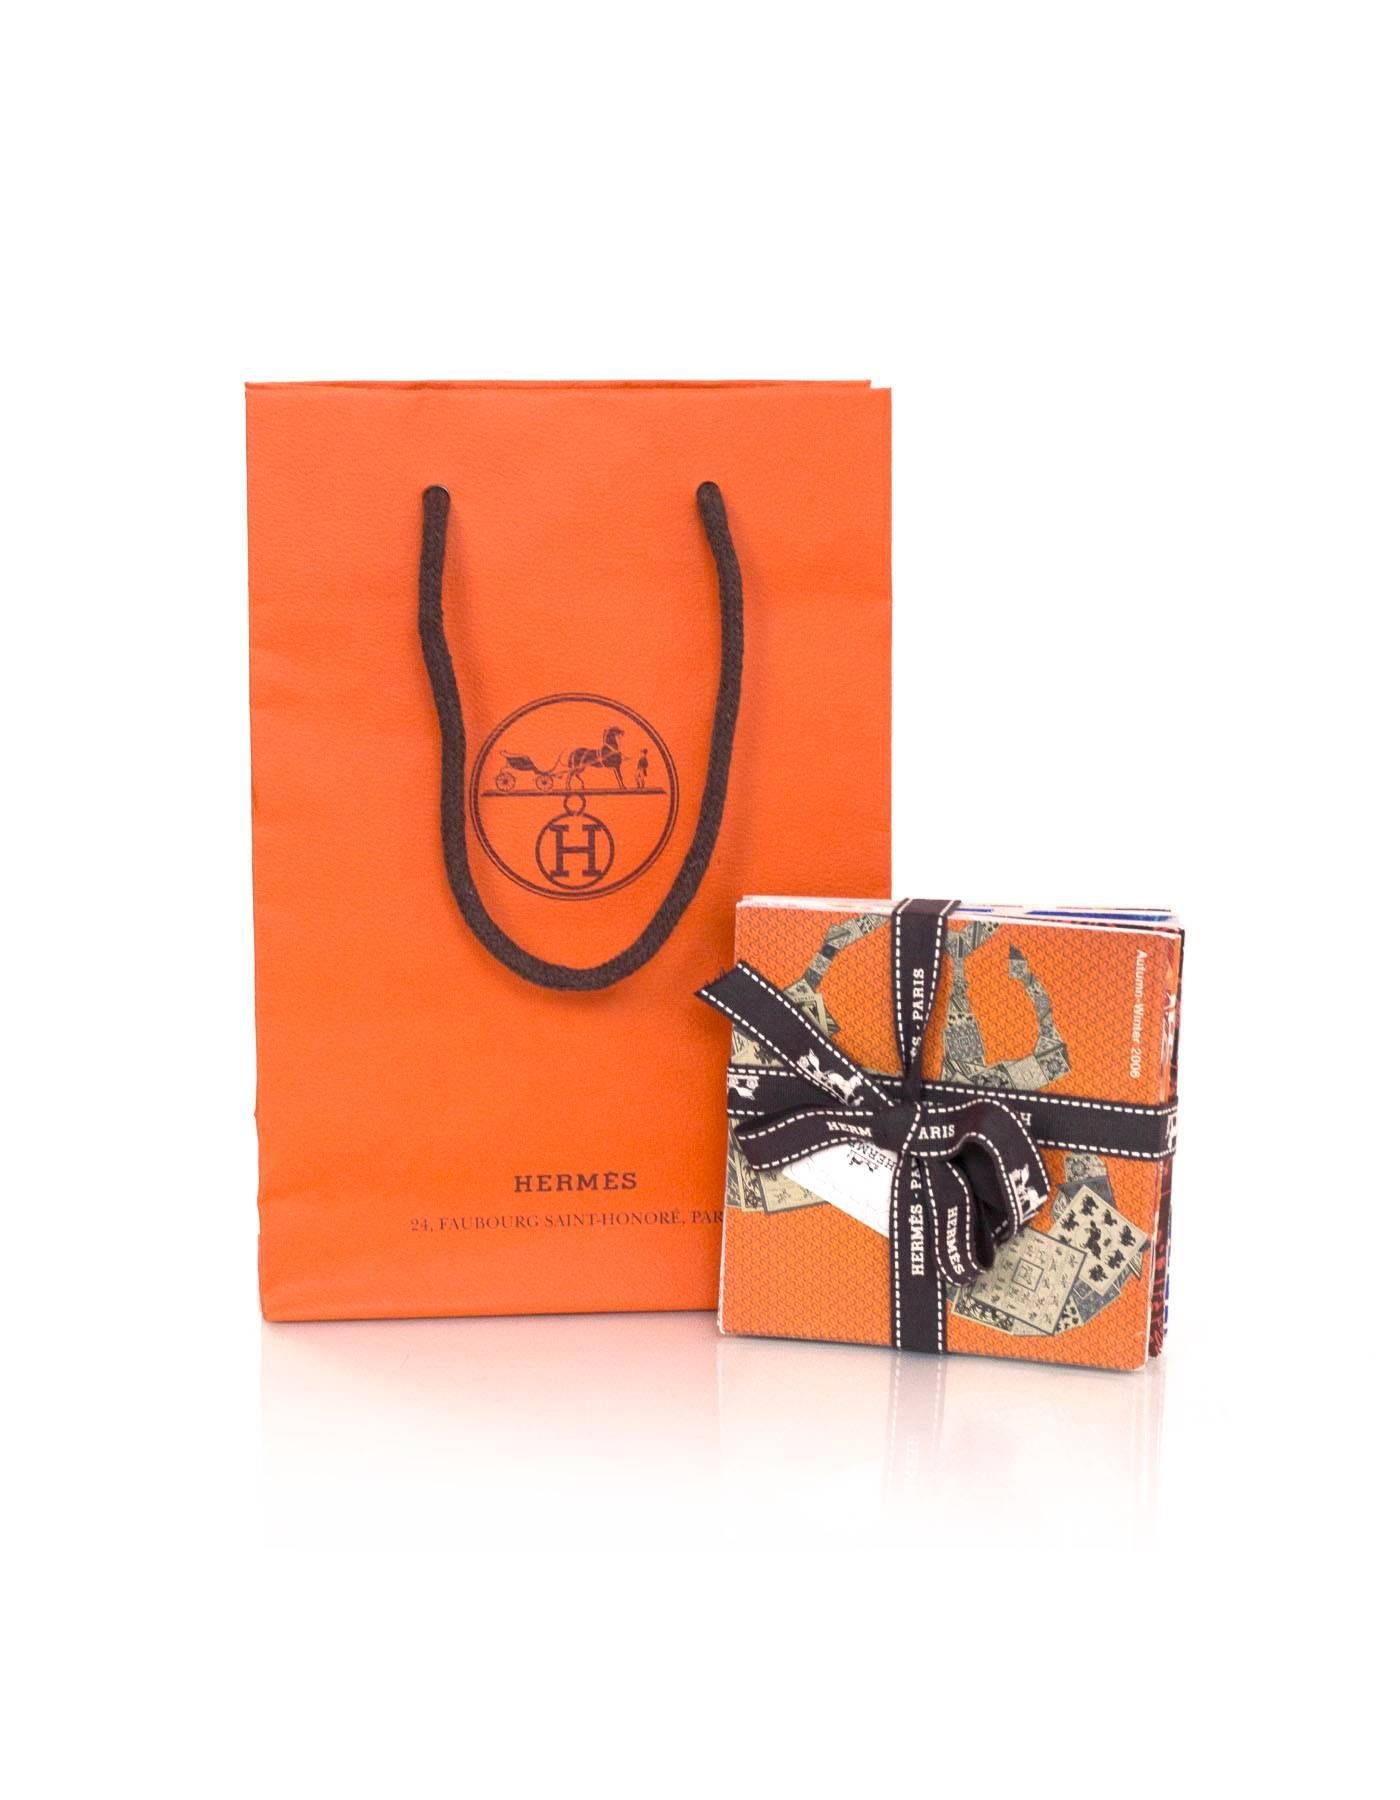 Set of seven Hermes illustrated booklets featuring ways to tie Hermes scarves, prints and names. From Fall '02, Spring/Fall '03, Spring/Fall '04, Spring/Fall '06. Shopping bag included.

 
Condition: Excellent pre-owned